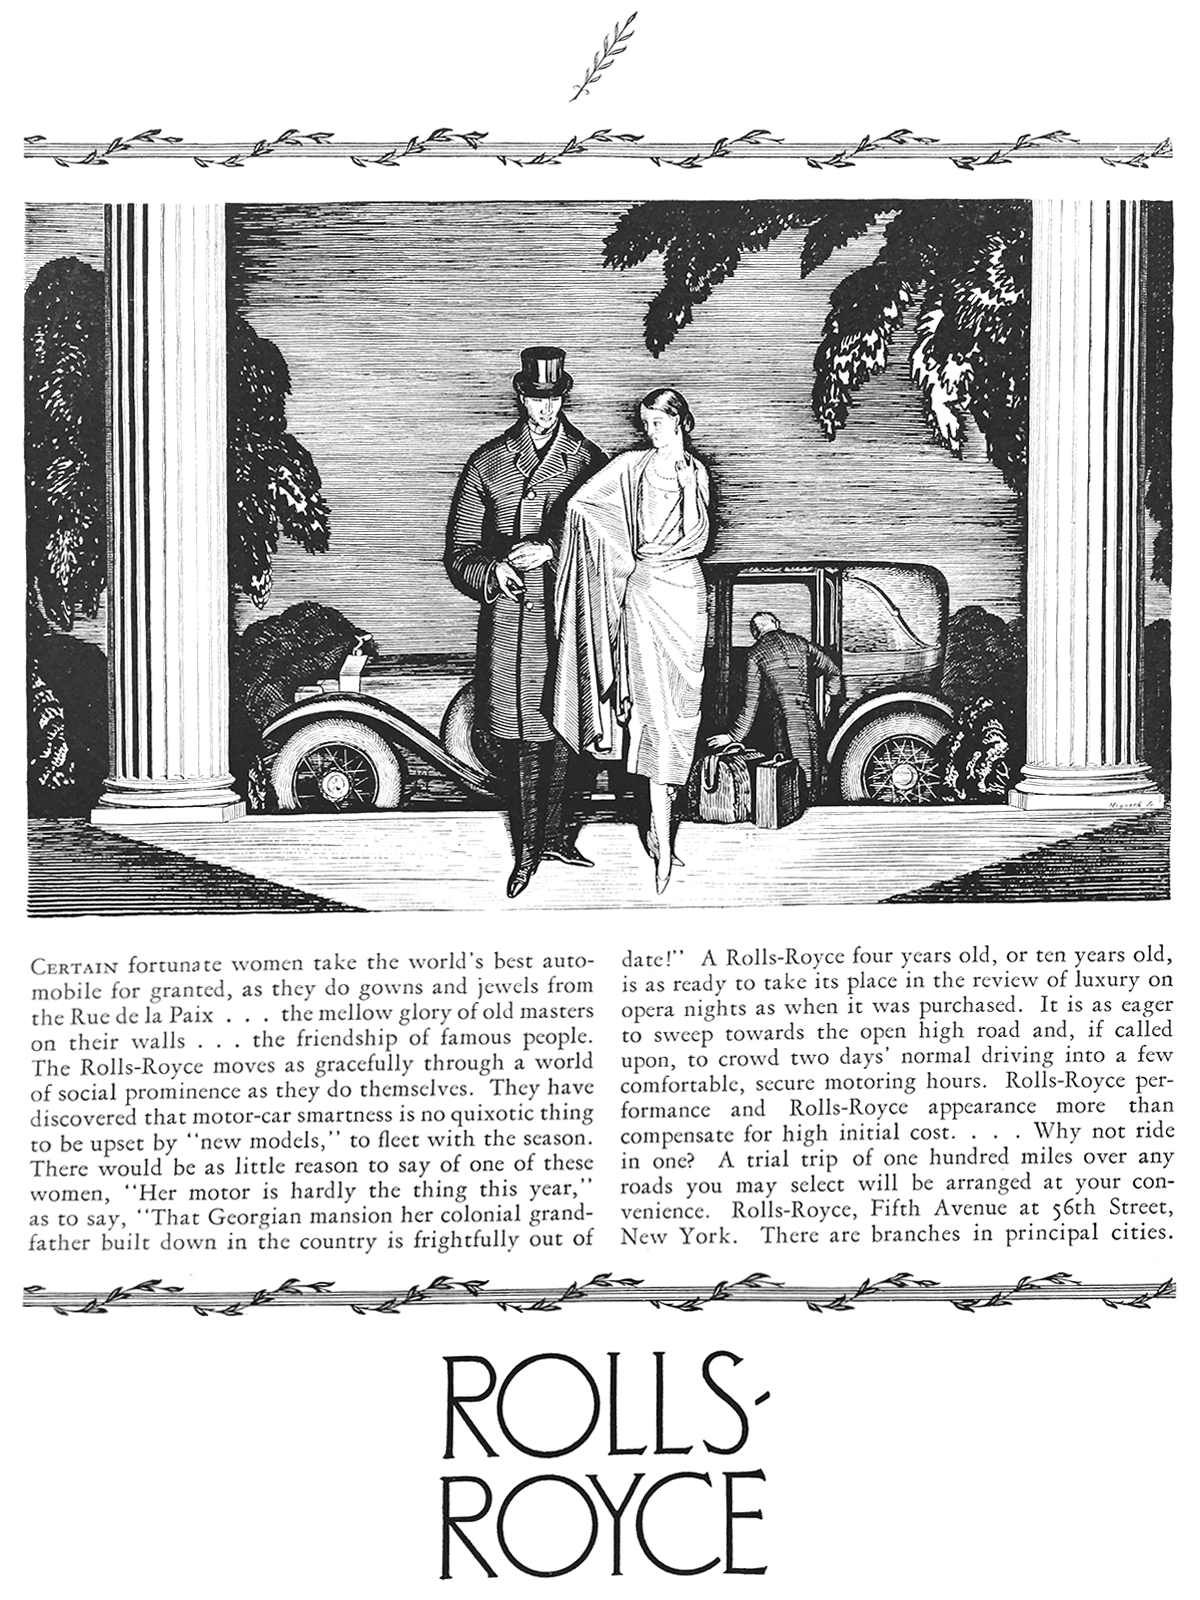 Rolls-Royce Ad (July, 1926): Illustrated by Rockwell Kent 